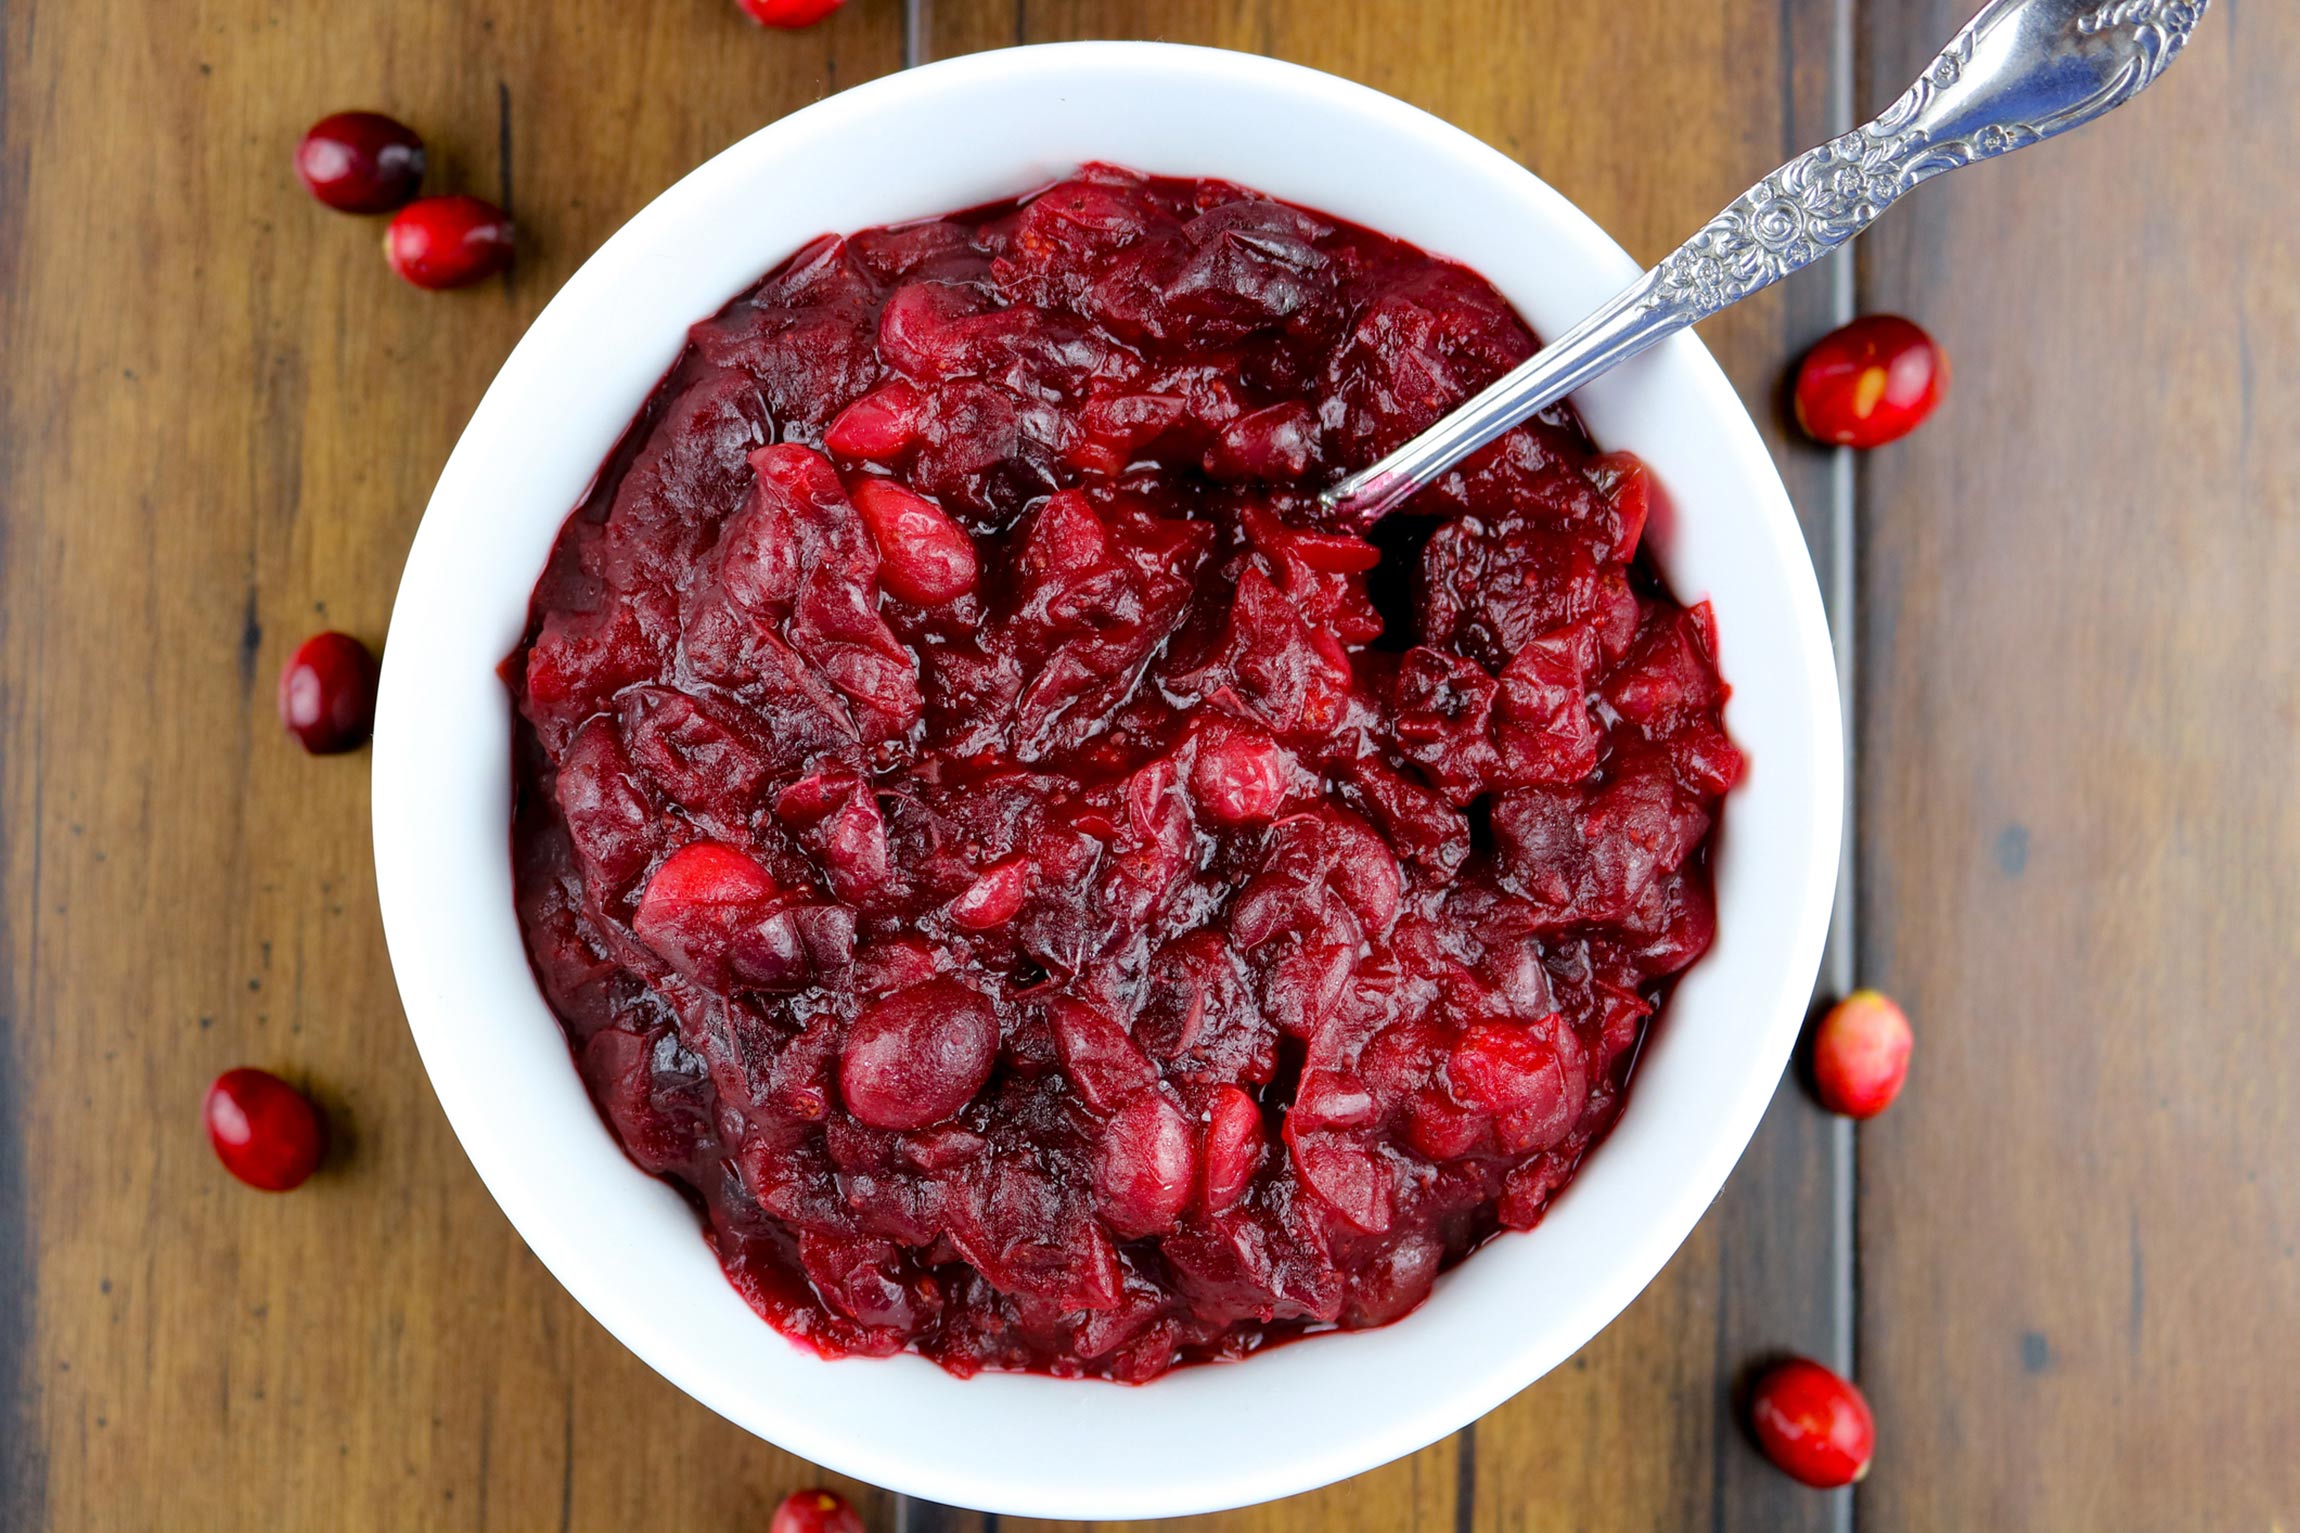 Healthy holiday food swaps: cranberry sauce